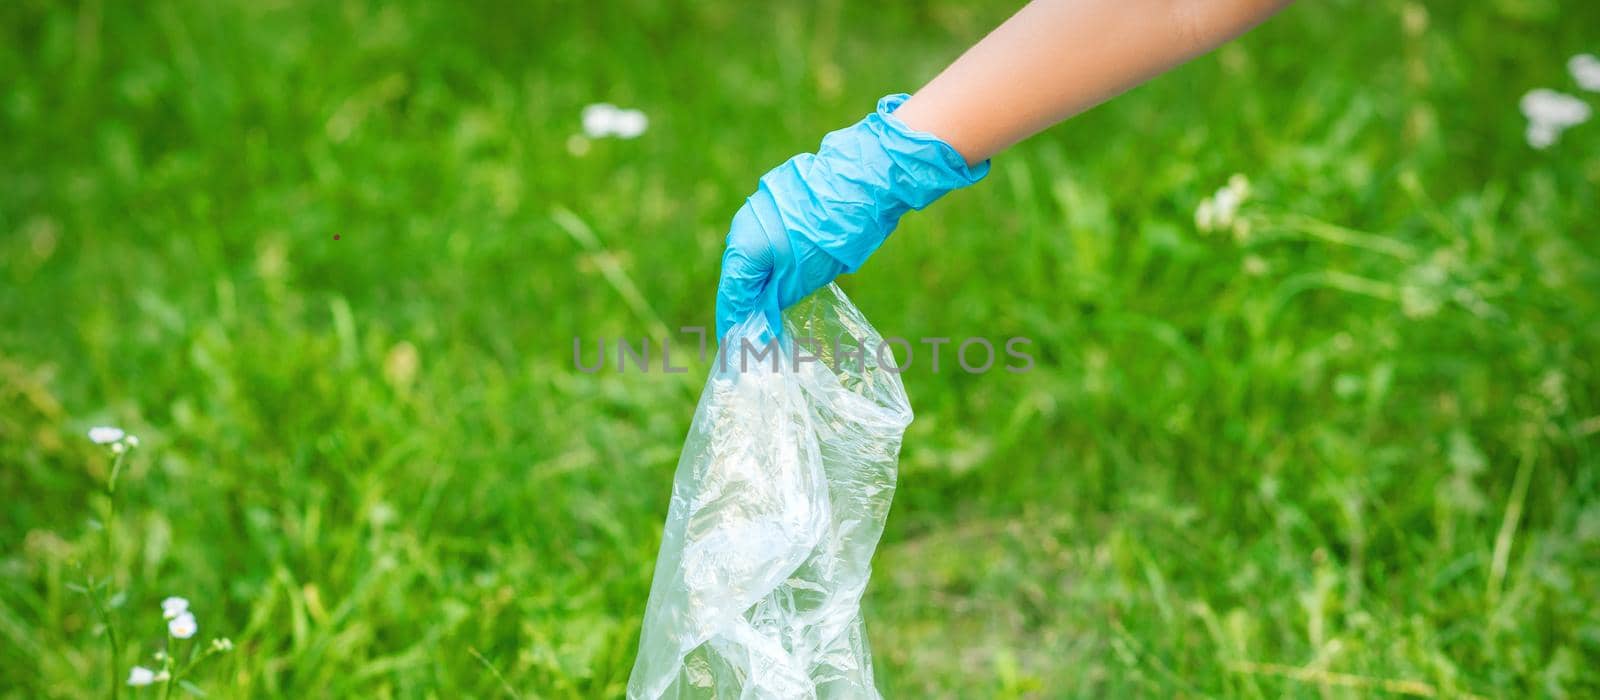 Hand of child cleans the park from plastic debris lying on the green grass